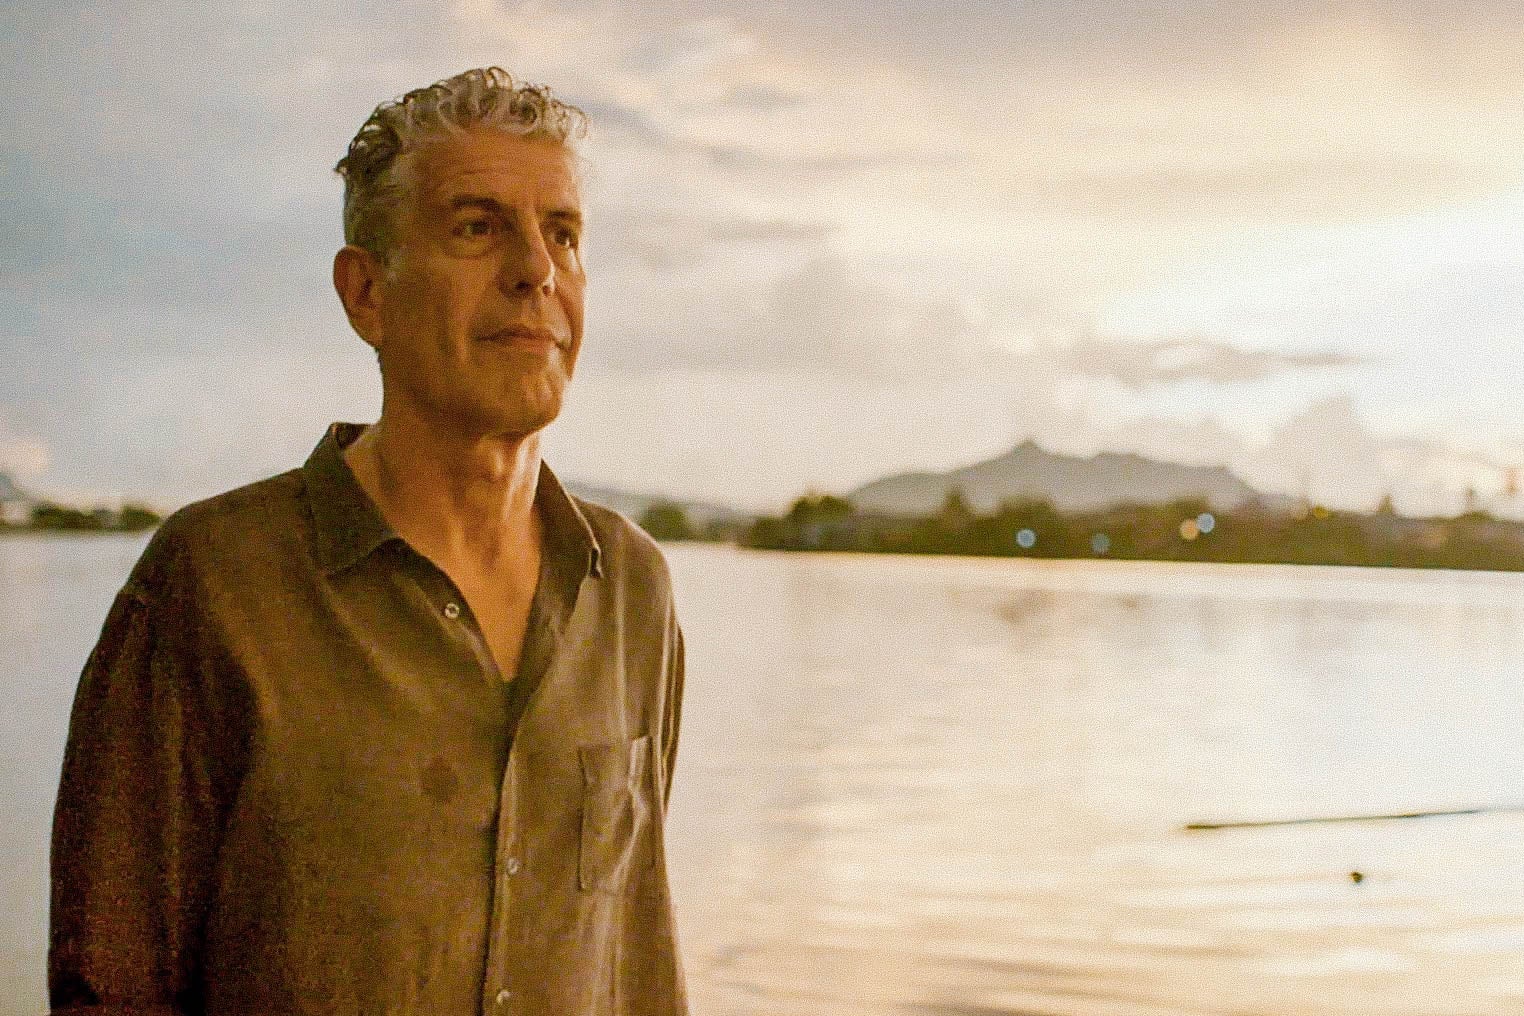 Anthony Bourdain stands in front of a body of water reflecting an orange sky.